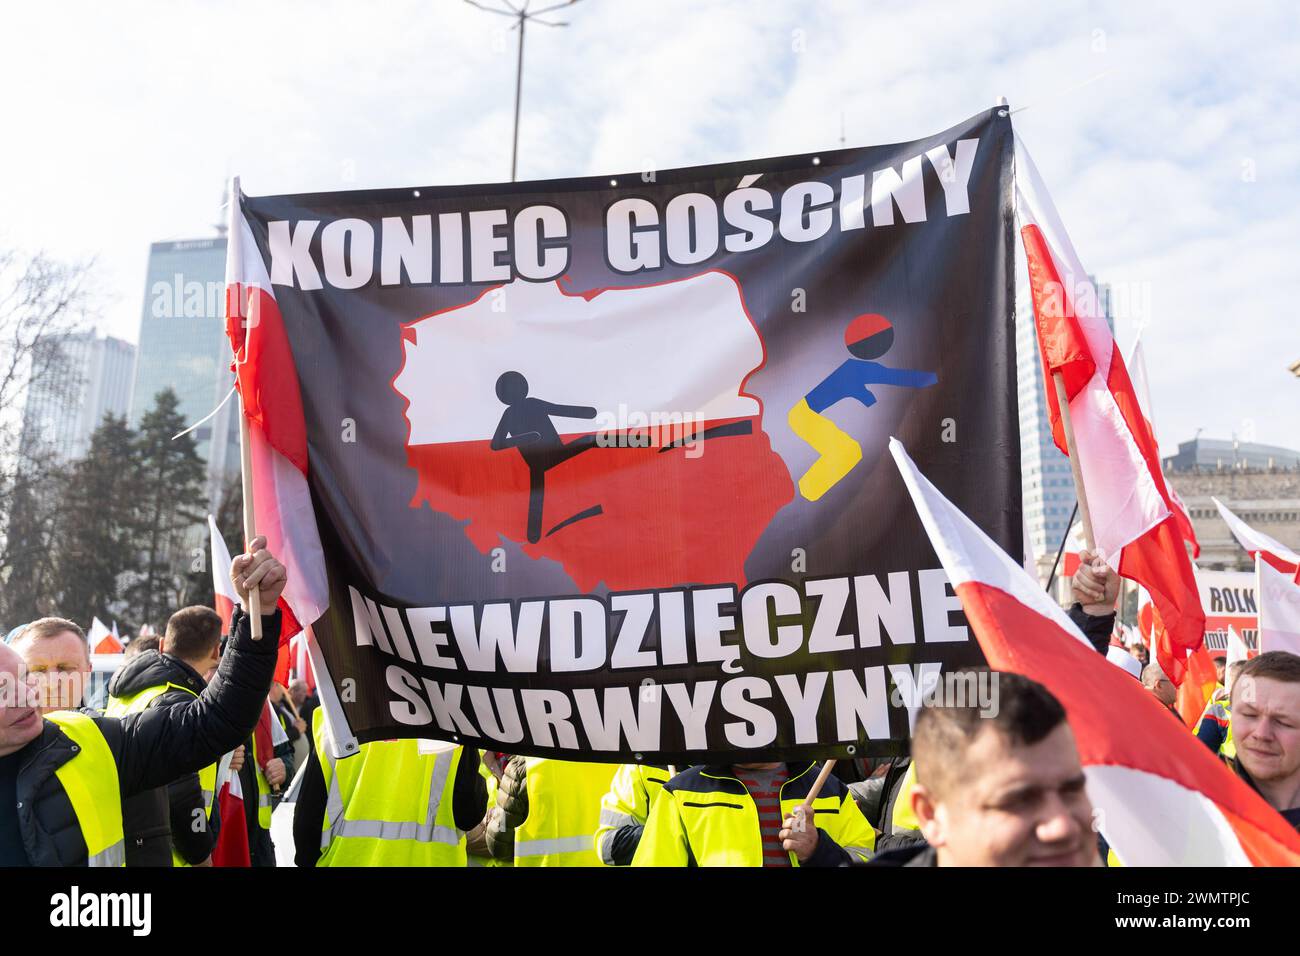 Protesters hold an anti-Ukrainian banner that says 'No more hospitality, you ungrateful bastards' during a demonstration. Farmers rallied in the heart of Warsaw to voice their discontent with the agricultural policies of the European Union. Polish farmers strongly oppose the European Commission's recent move to prolong duty-free trade with Ukraine until 2025. Additionally, they are opposed to the adoption of the EU's Green Deal, the influx of inexpensive agricultural goods from Ukraine, and are calling for assistance in bolstering animal husbandry. During the protest, farmers set off flares, i Stock Photo